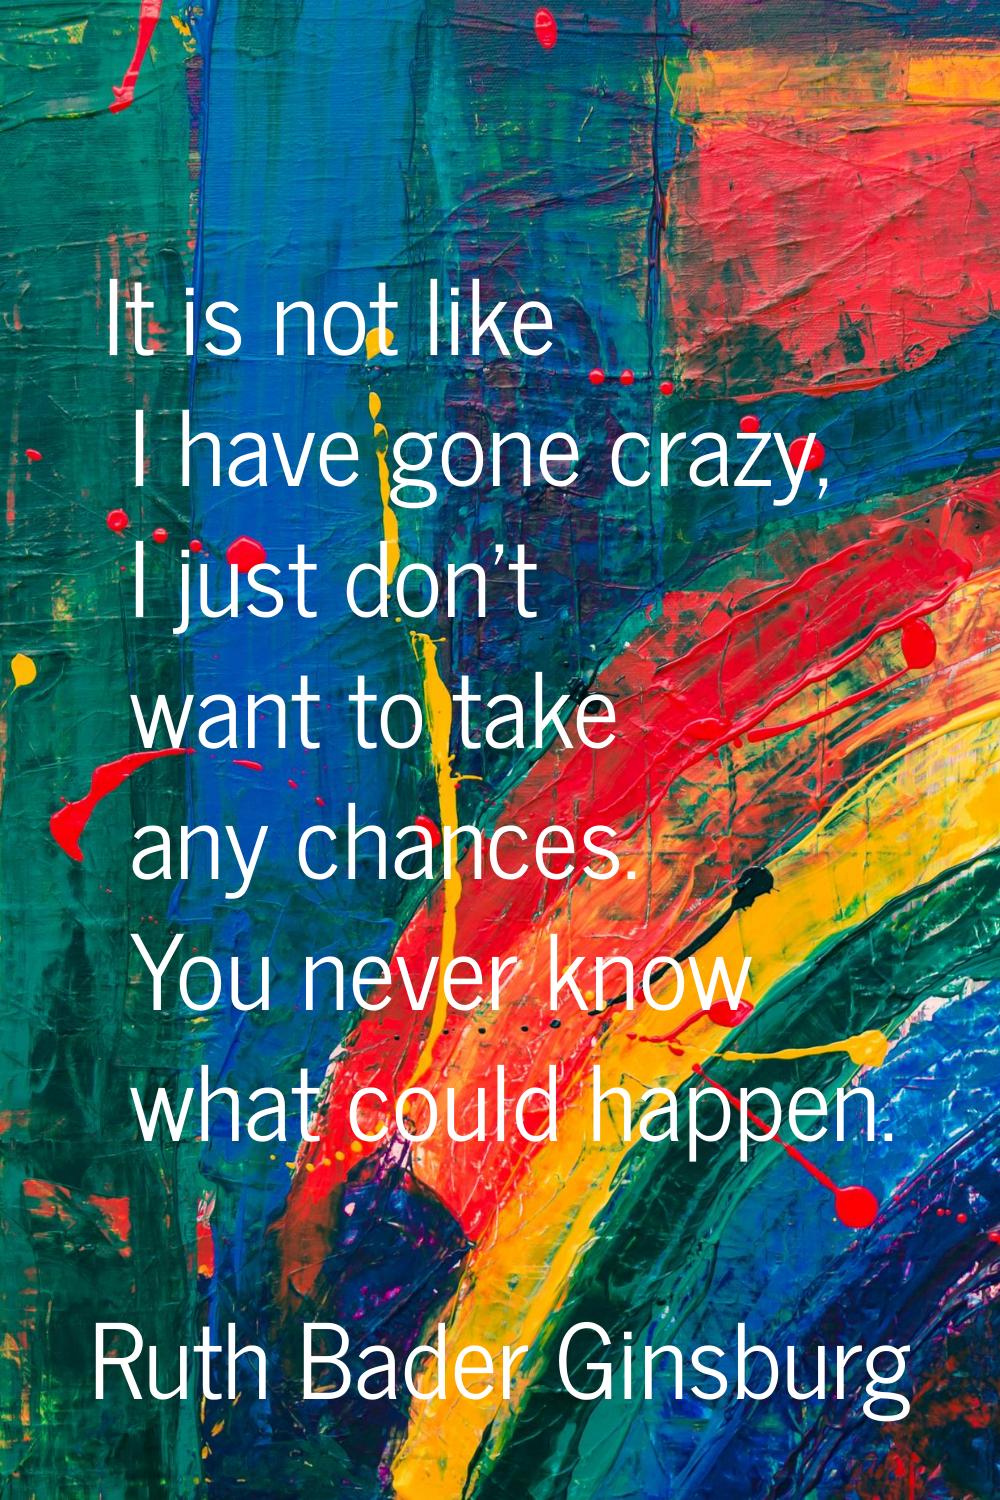 It is not like I have gone crazy, I just don't want to take any chances. You never know what could 